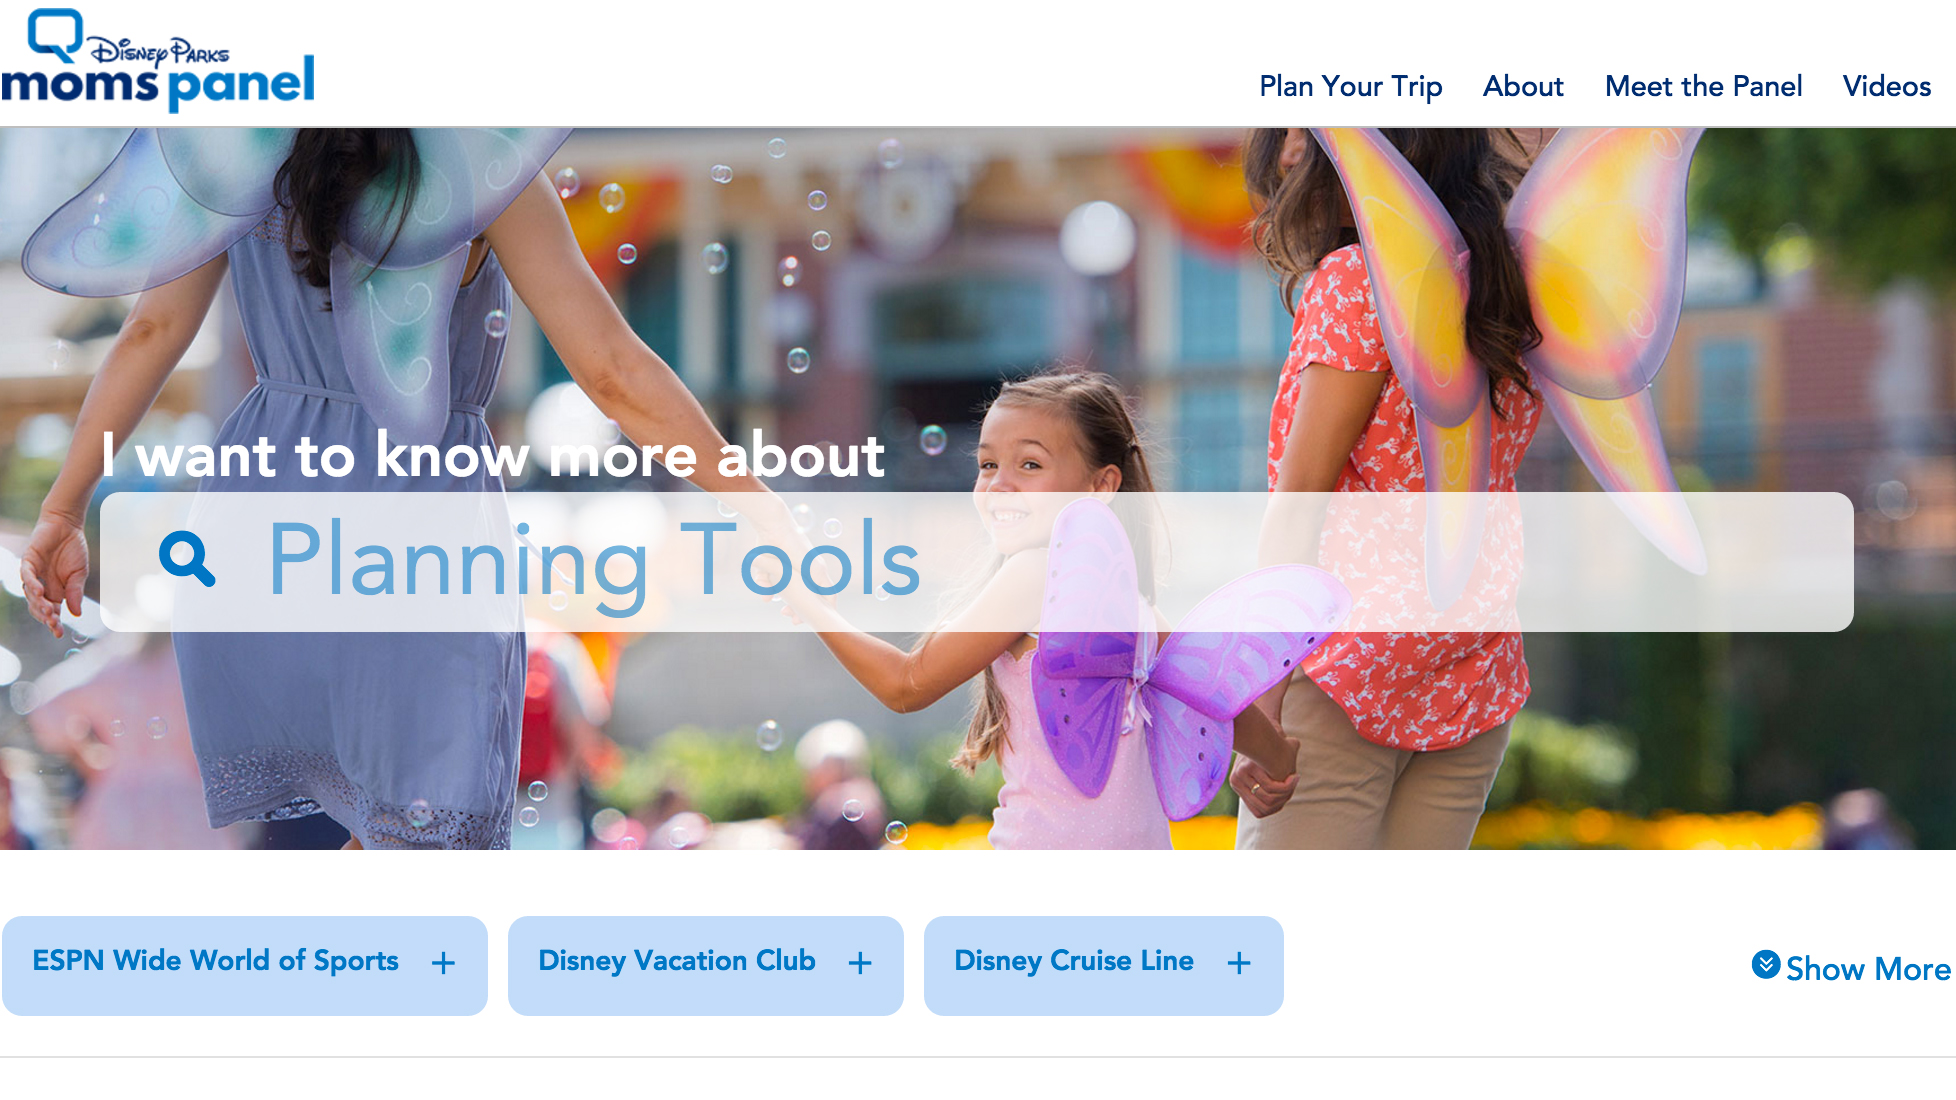 The Search for New Disney Parks Moms Panelists Begins on September 7th